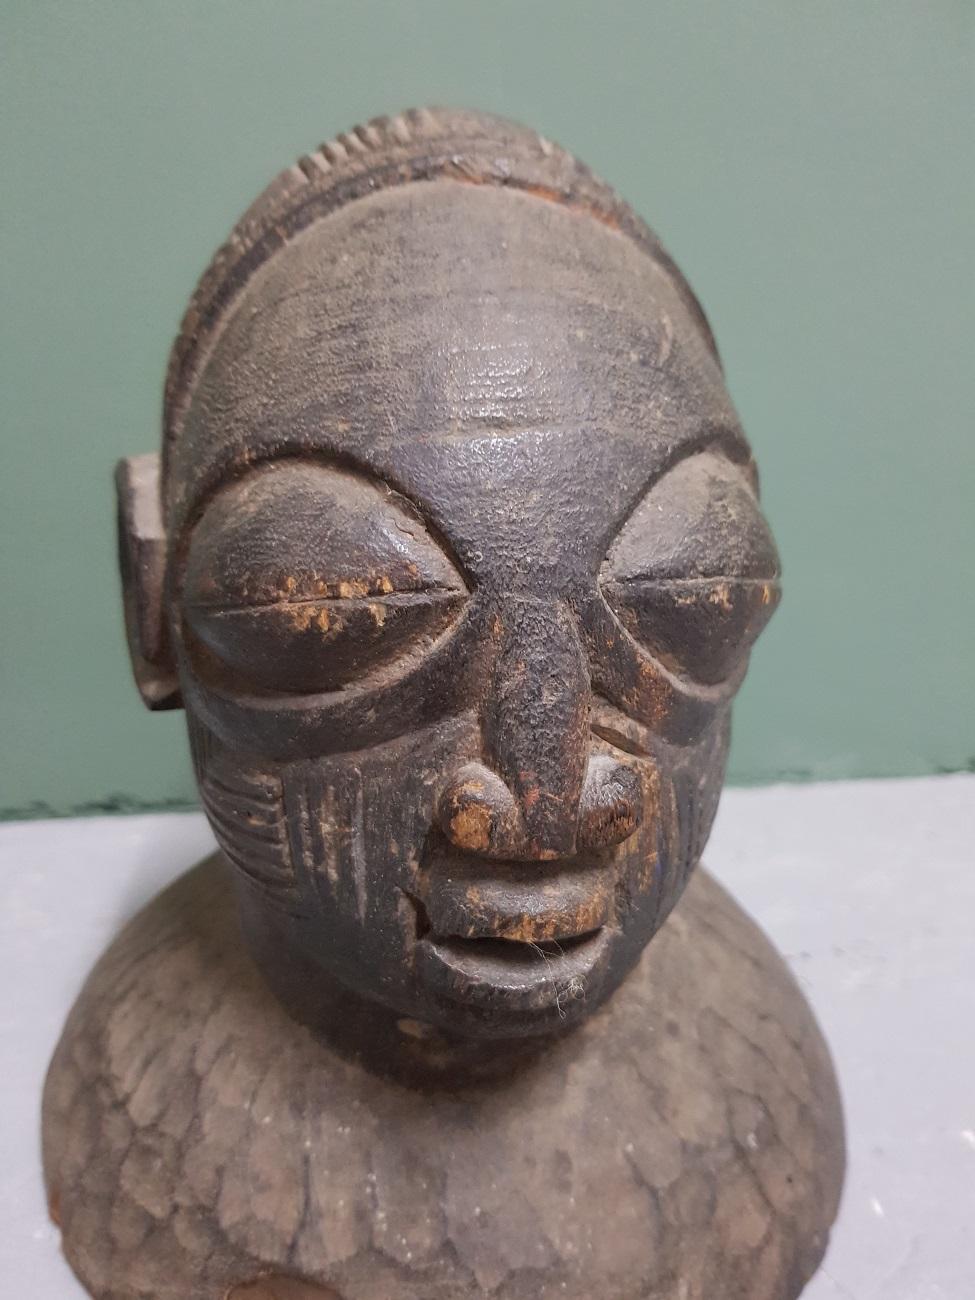 A hand carved wooden head mask for dances in honour of ‘Egungun’, the god of ancestors, from the Yoruba tribe of Nigeria first half of the 20th century.

The measurements are,
Depth 19 cm/ 7.4 inch.
Width 19.5 cm/ 7.6 inch.
Height 22 cm/ 8.6